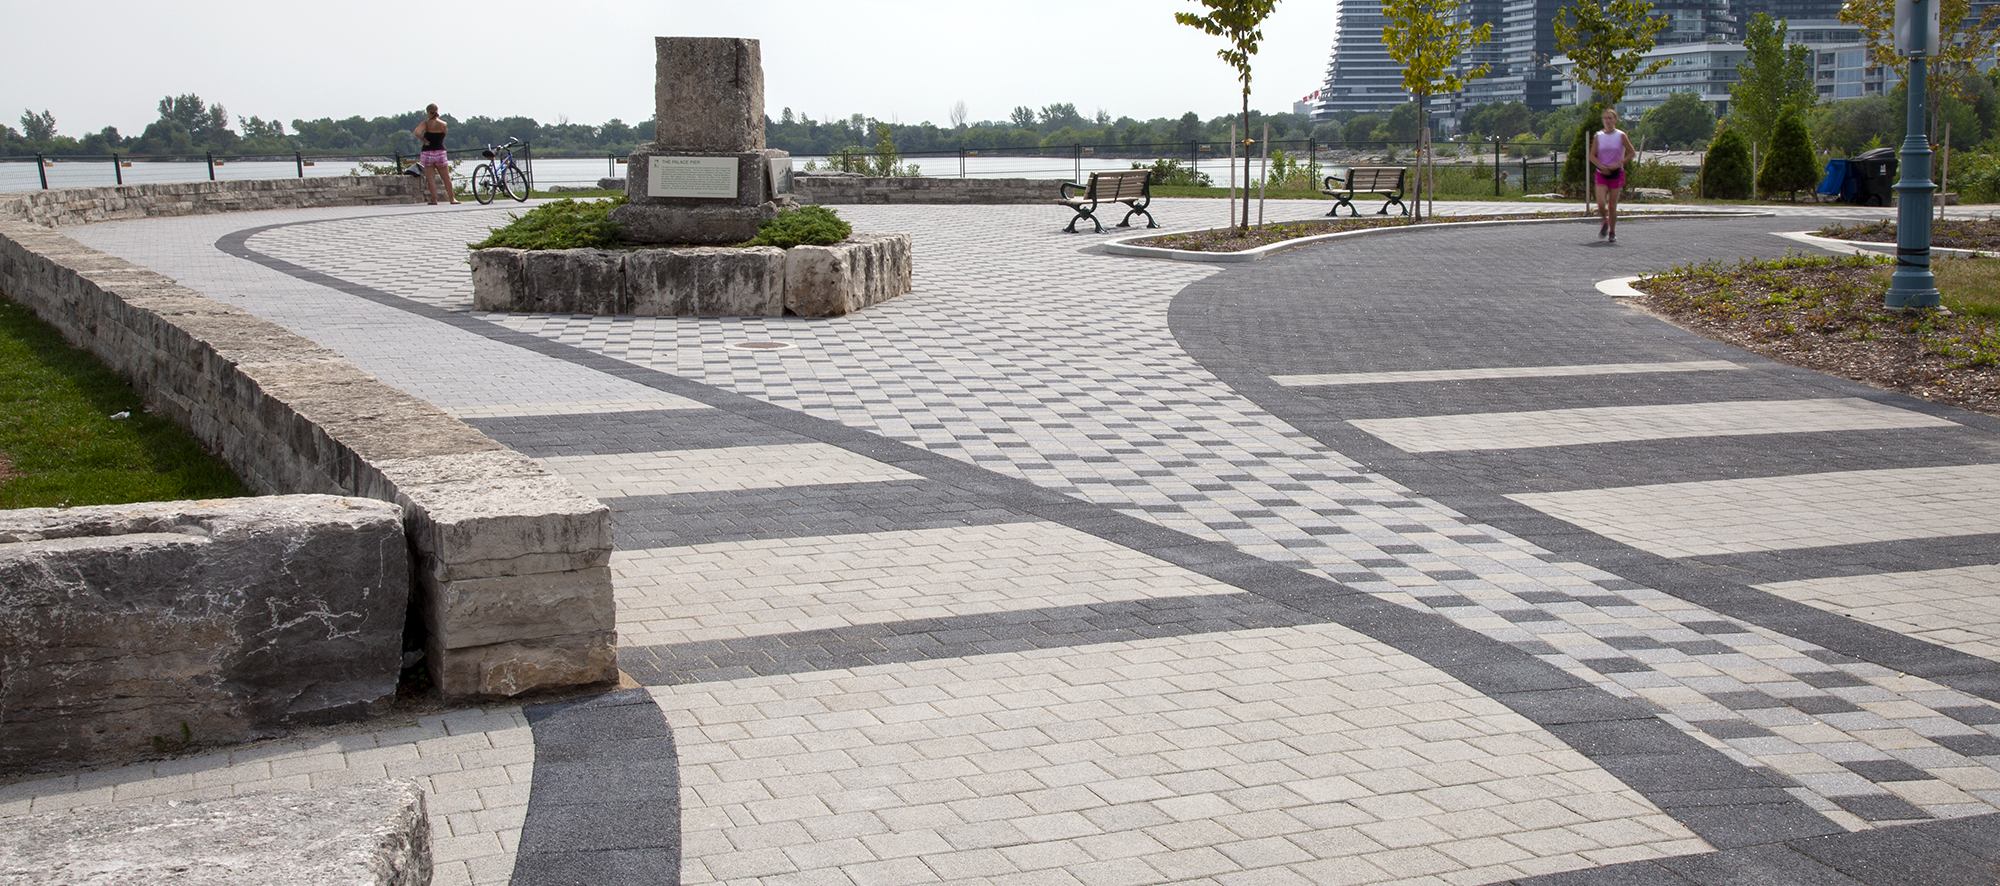 Tri-colored Series pavers create a stunning checkerboard pattern shoreside, as joggers pass by on either side of the paver rug.